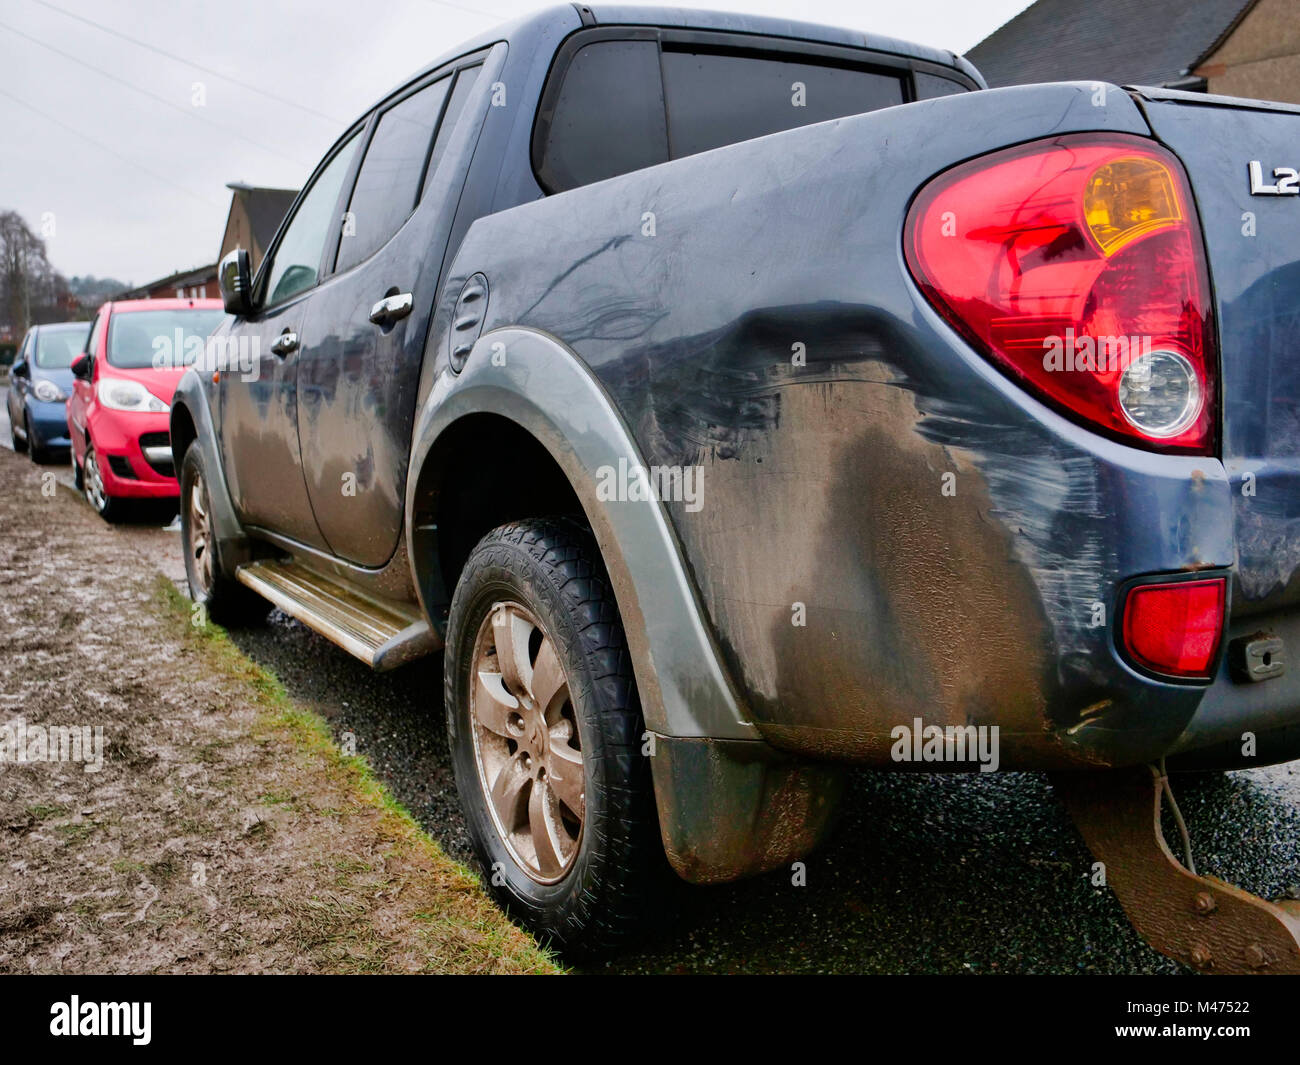 Ashbourne, UK. 14th February, 2018. Cars damaged by the scrum during Ashbourne Royal Shrovetide hugball Football match Ash Wednesday 14th February 2018. Ye Olde & Ancient Medieval hugball game is the forerunner to football. It's played between two teams, the Up'Ards & Down'Ards separated by the Henmore Brook river. The goals are 3 miles apart at Sturston Mill & Clifton Mill. Credit: Doug Blane/Alamy Live News Stock Photo